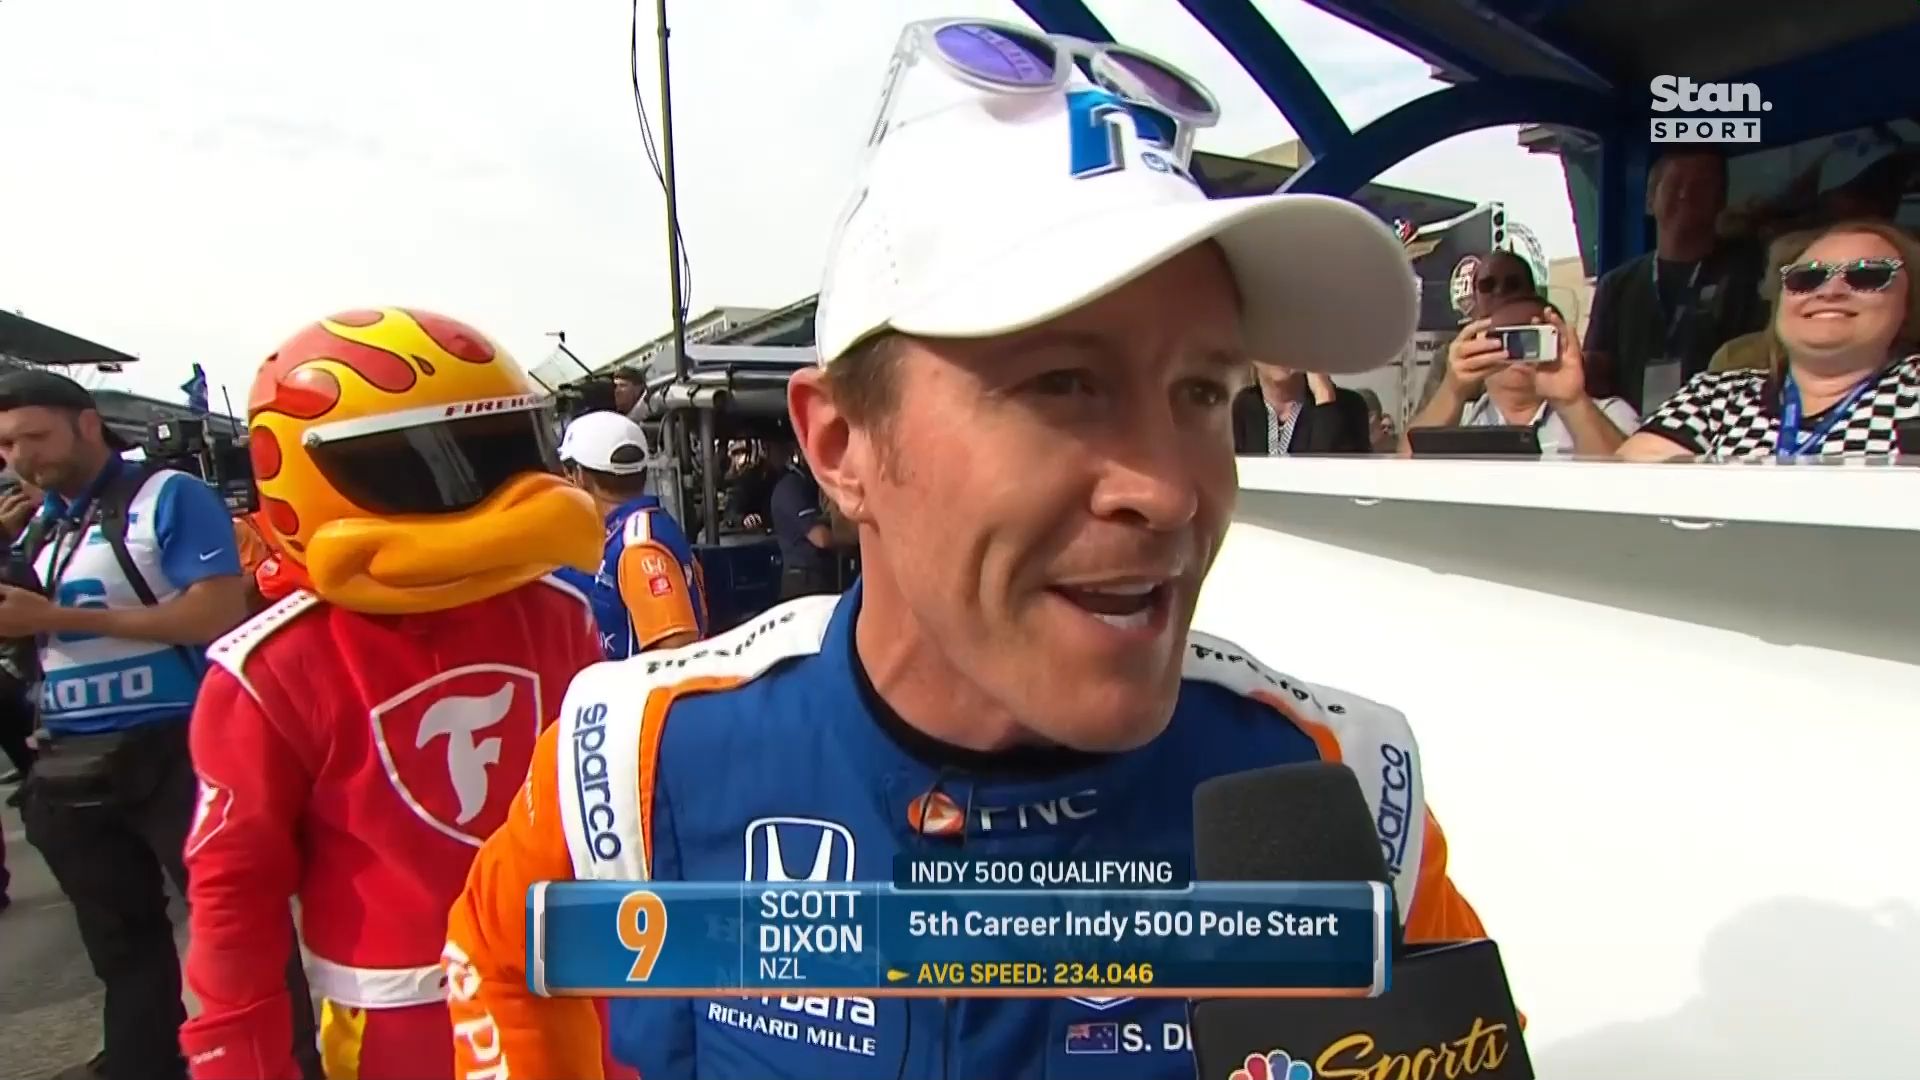 New Zealand's Scott Dixon smashes Indy 500 records with 'breath-taking' qualifying performance